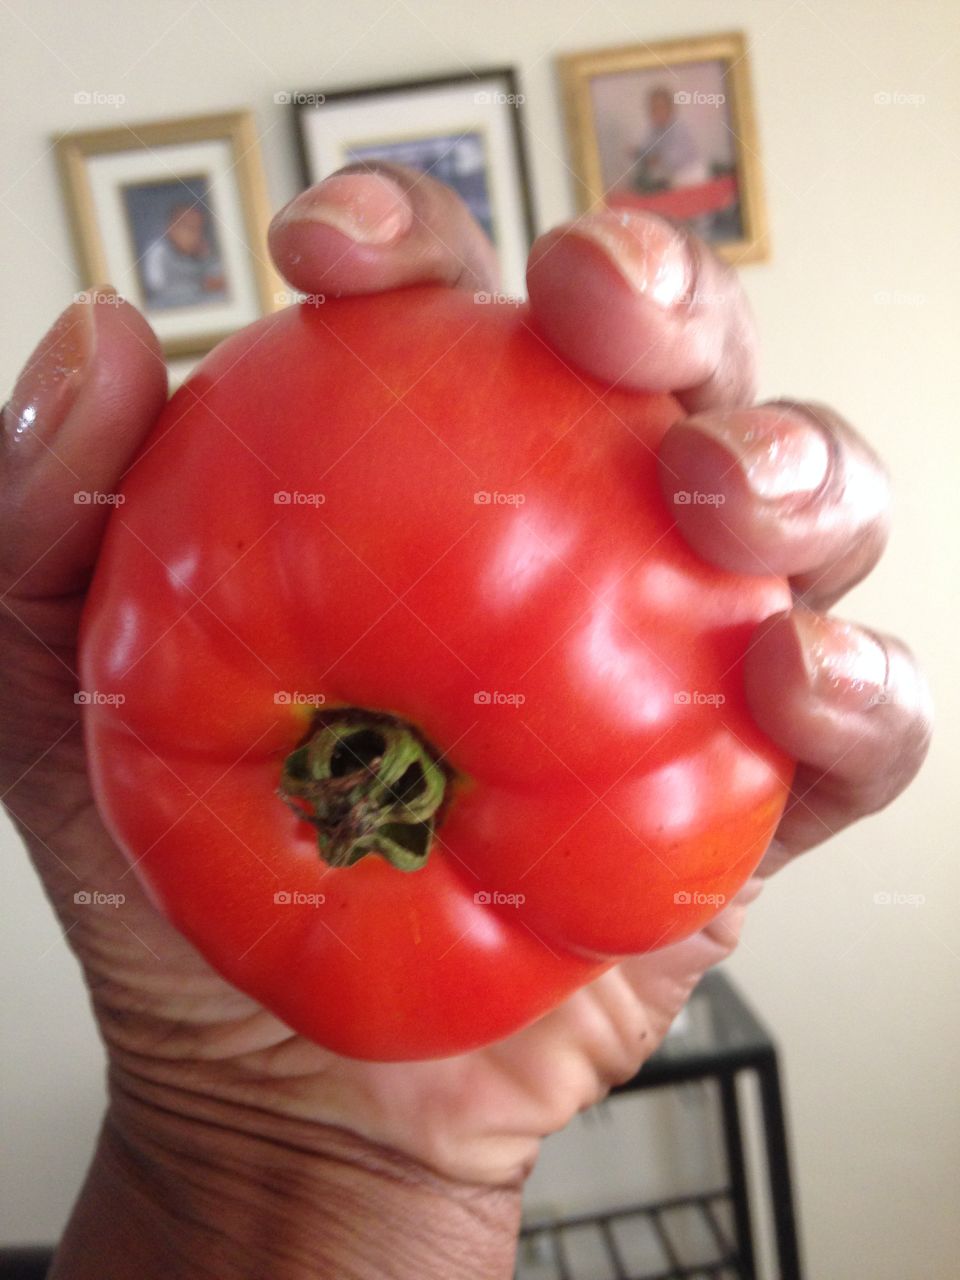 Ruby red tomato 